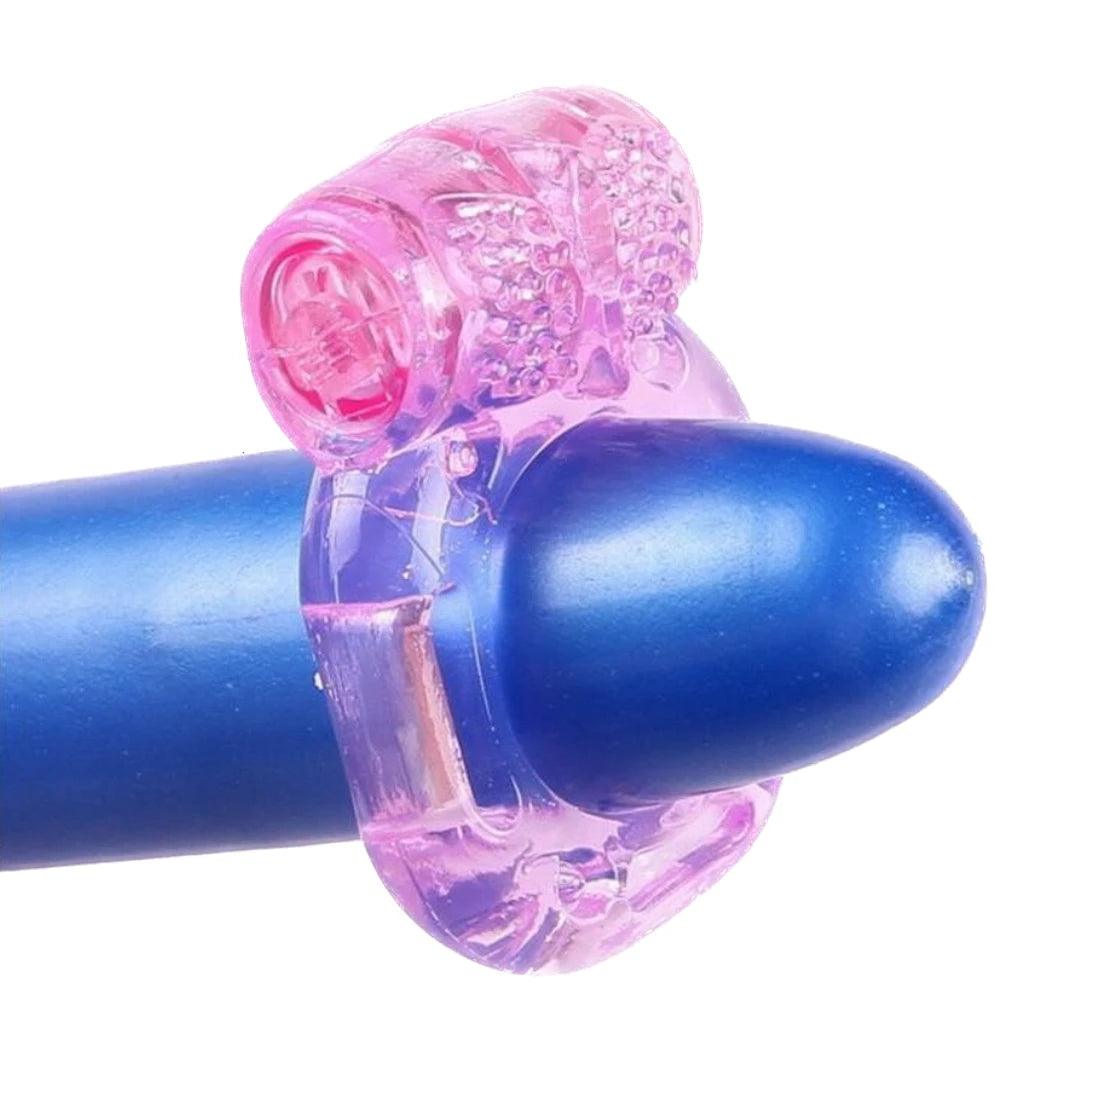 Stretchy Vibrating Cock Ring - LUSTLOVER